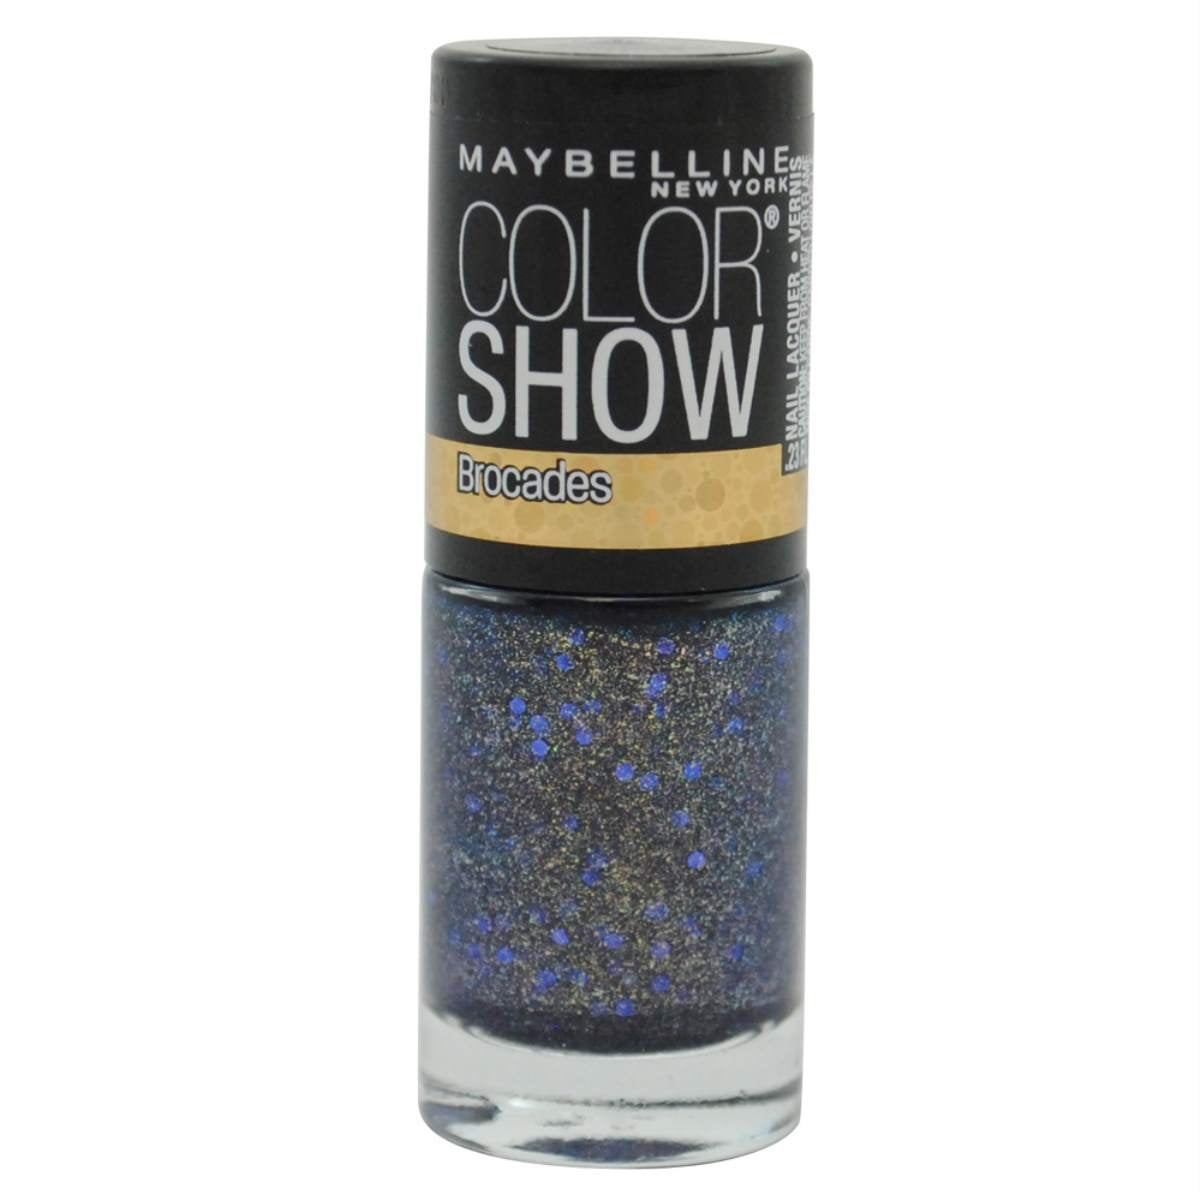 Maybelline Color Show Brocades Nail Lacquer #755 Embellished Blues